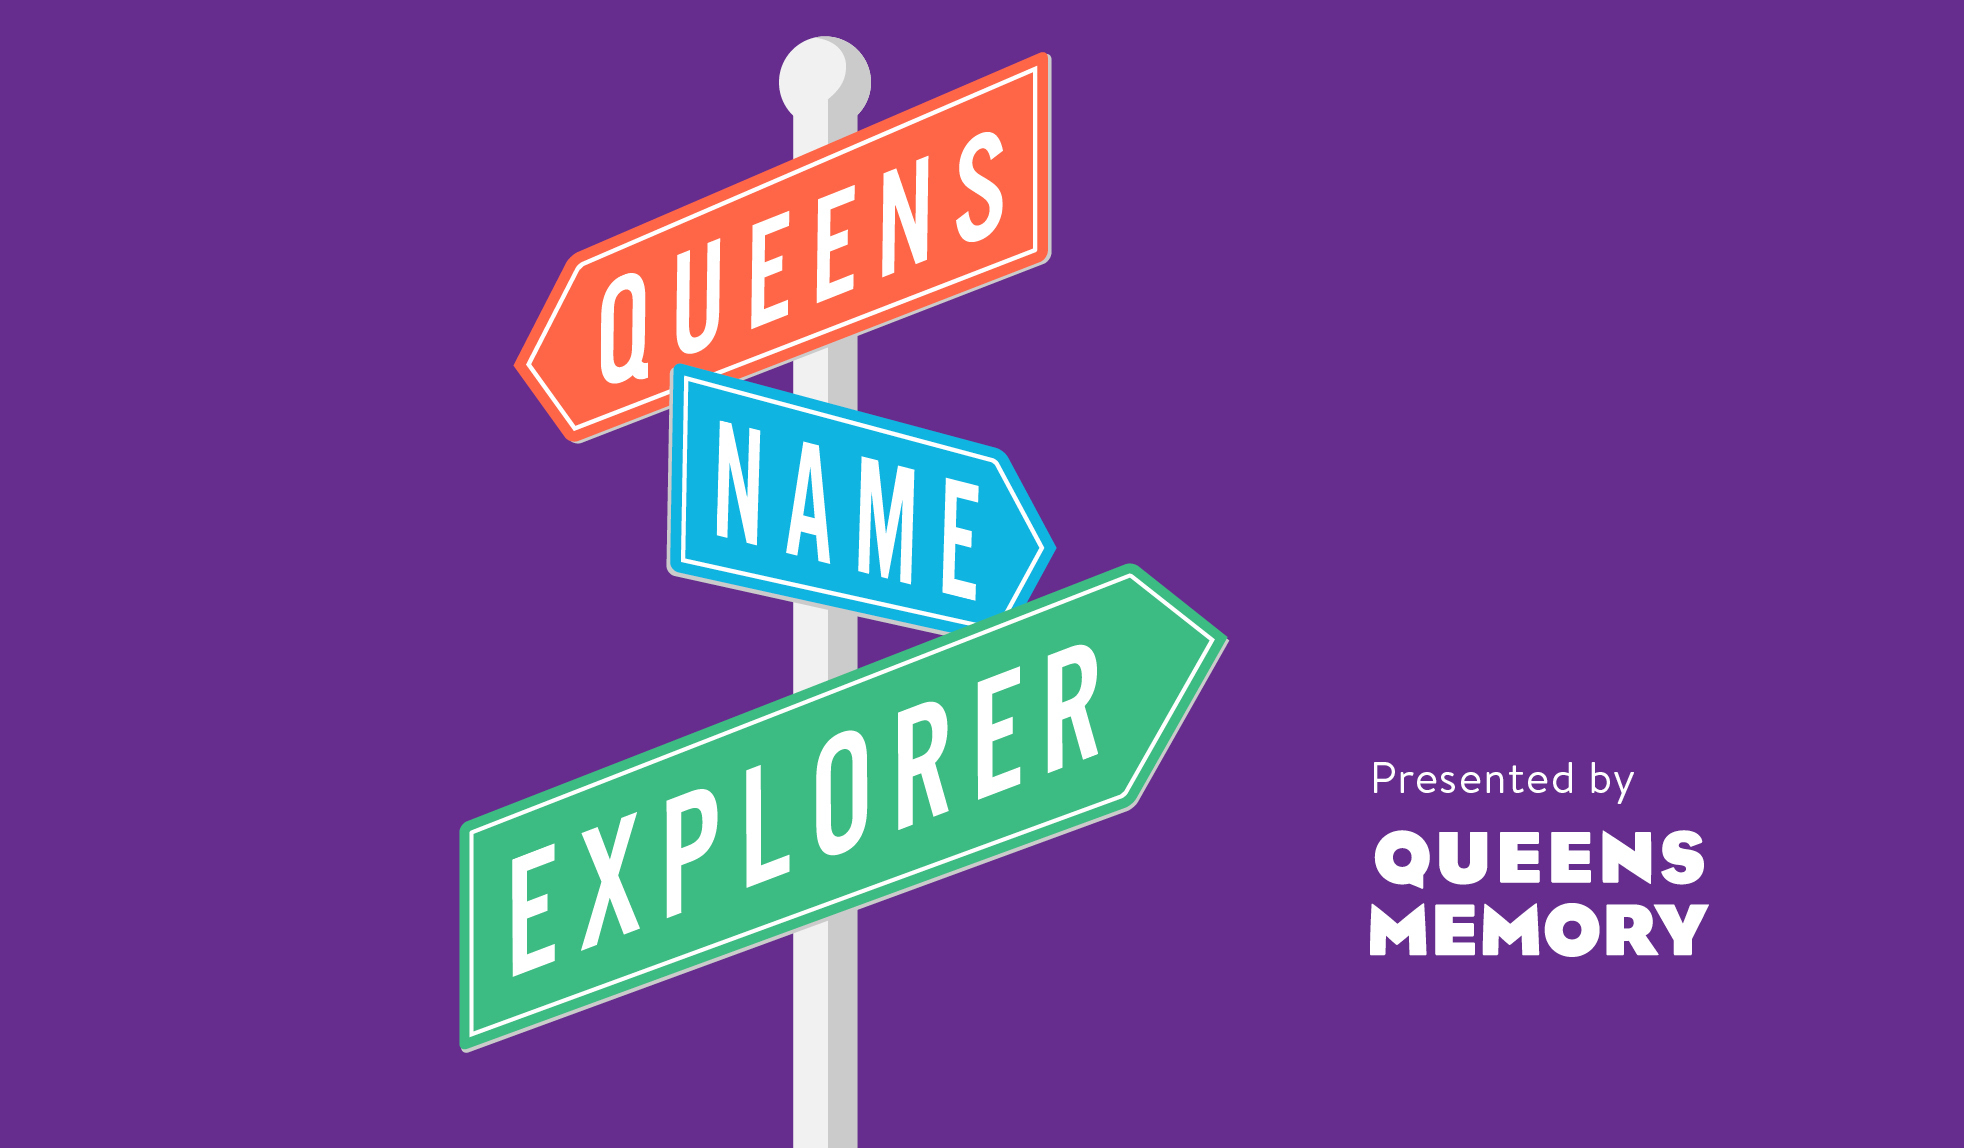 Learn the stories behind Queens’ named streets, schools, buildings, parks & monuments with Queens Name Explorer.